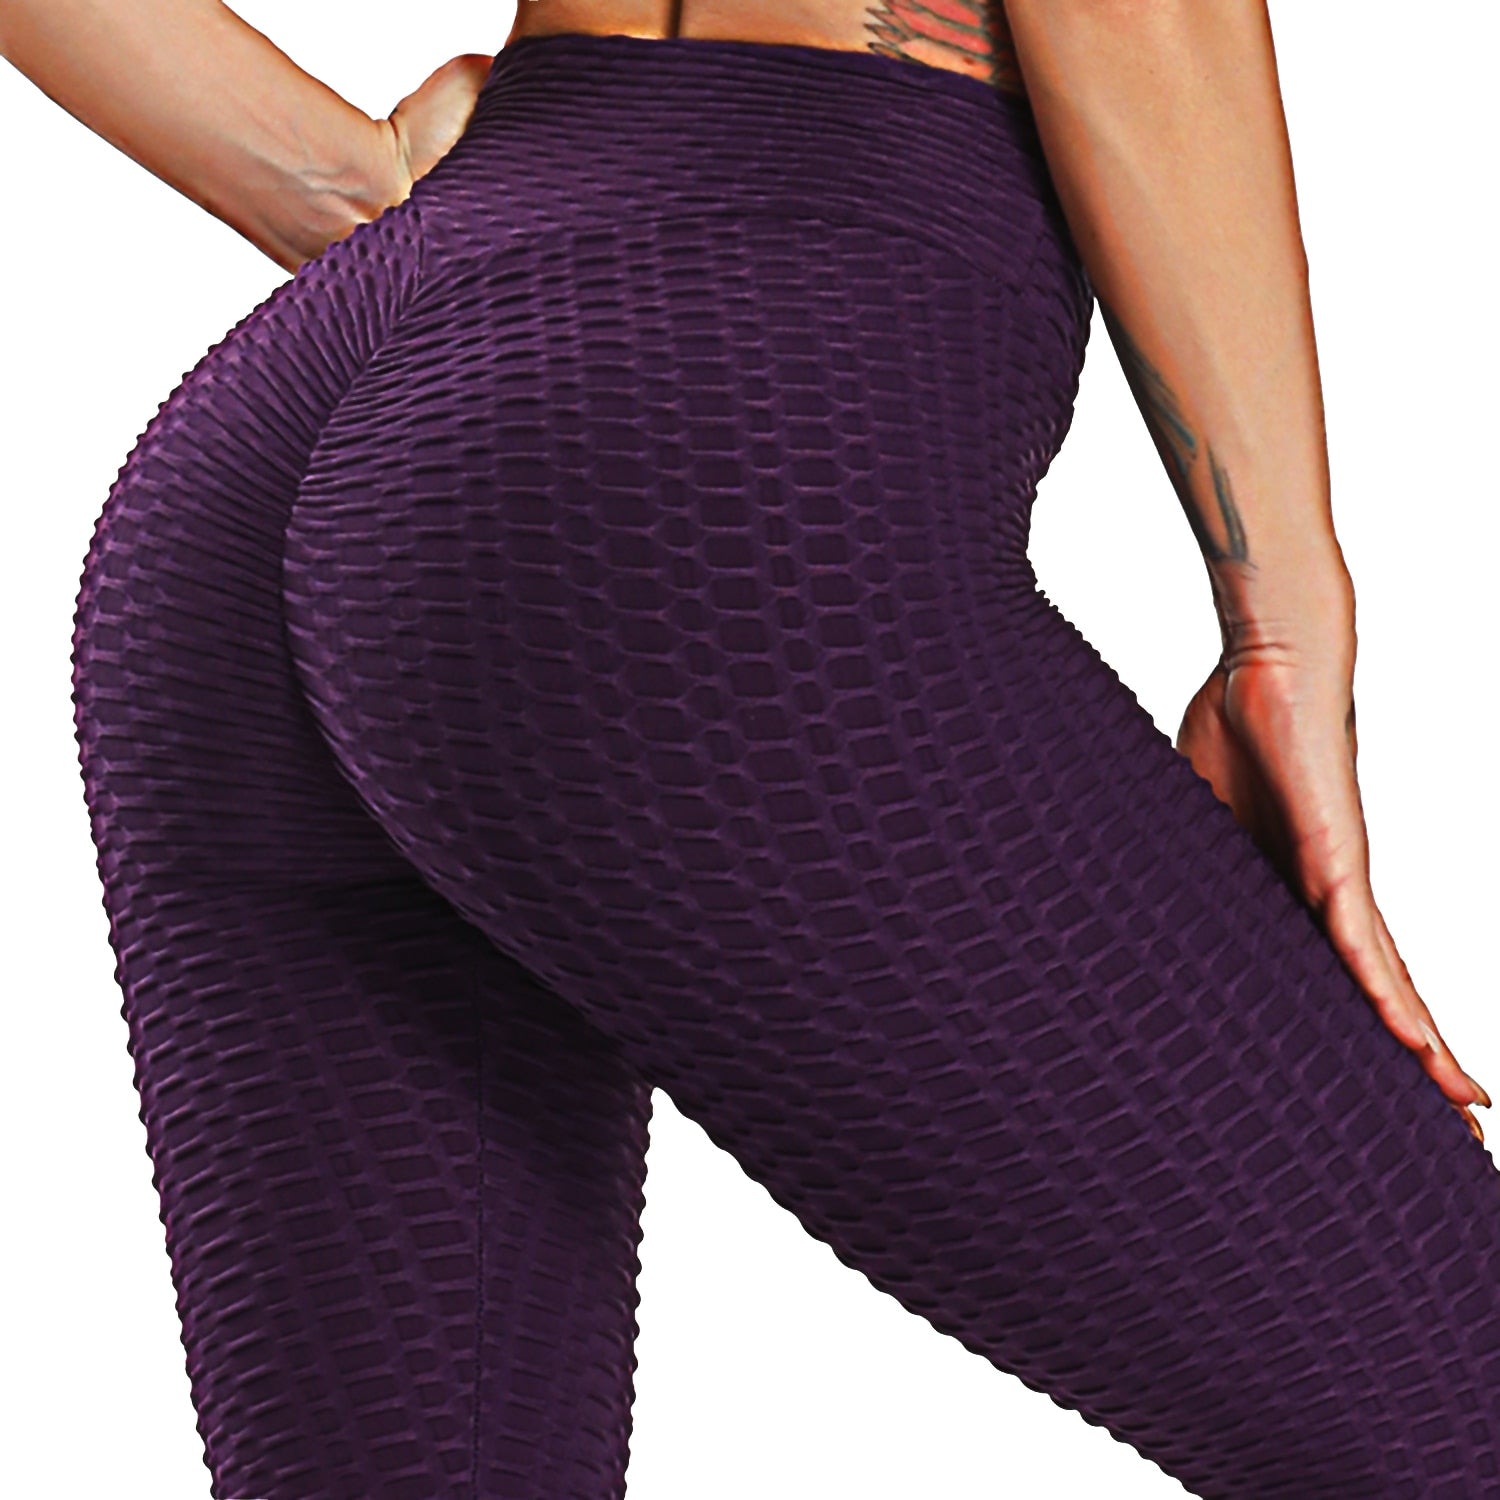 Scrunch Back Fitness Leggings Hips Up Booty Workout Pants Womens